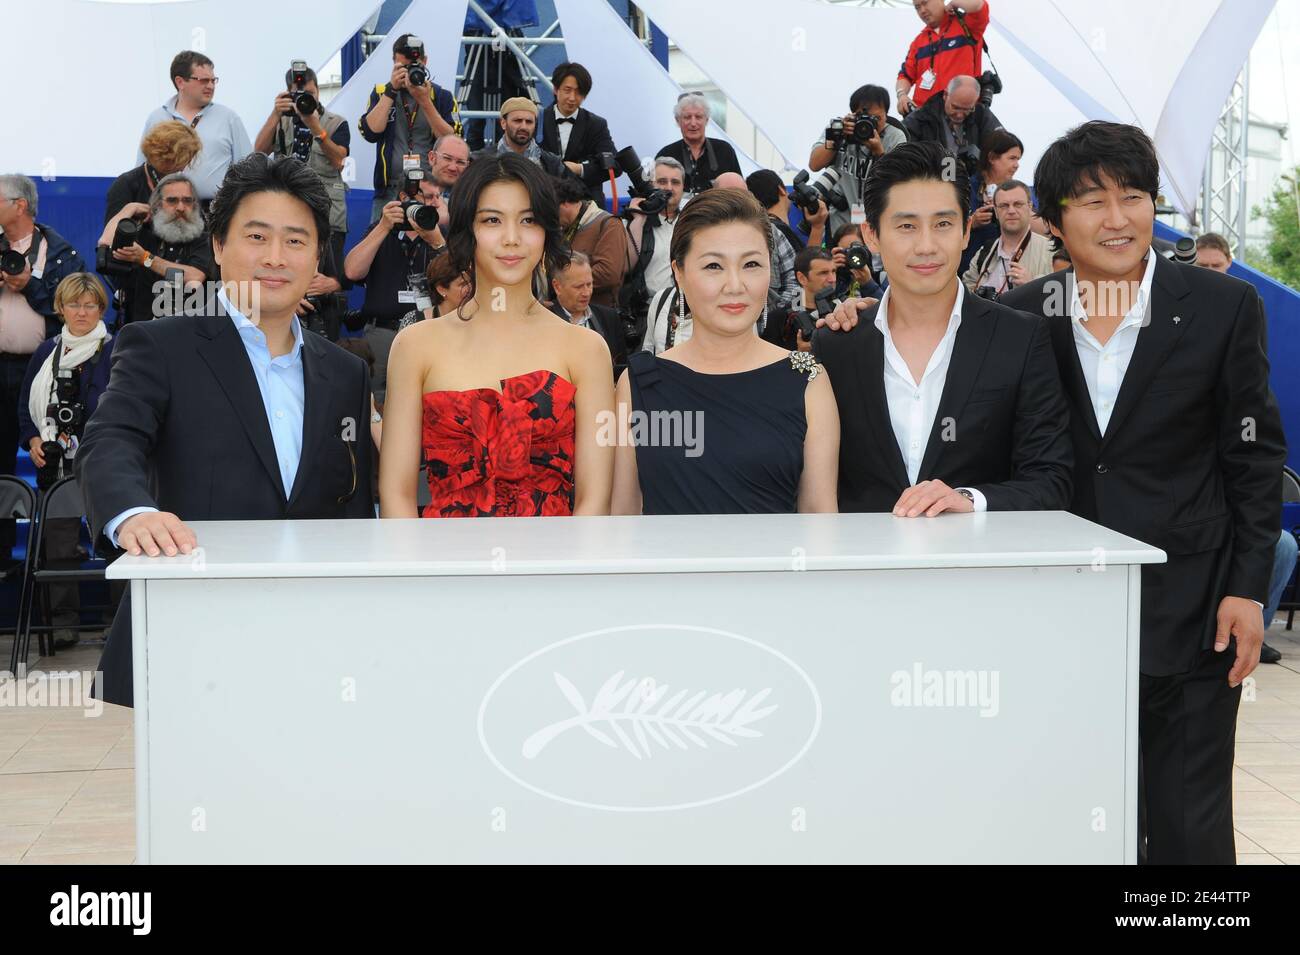 South-Korean director Chan-Wook Park , Kim Ok-Bin and Kim Hae-Sook, Shin Ha-Kyun and Song Kang-Ho attend the 'Thirst' Photocall held at the Palais Des Festivals during the 62nd International Cannes Film Festival in Cannes, France on May 15, 2009. Photo by Nebinger-Orban/ABACAPRESS.COM Stock Photo